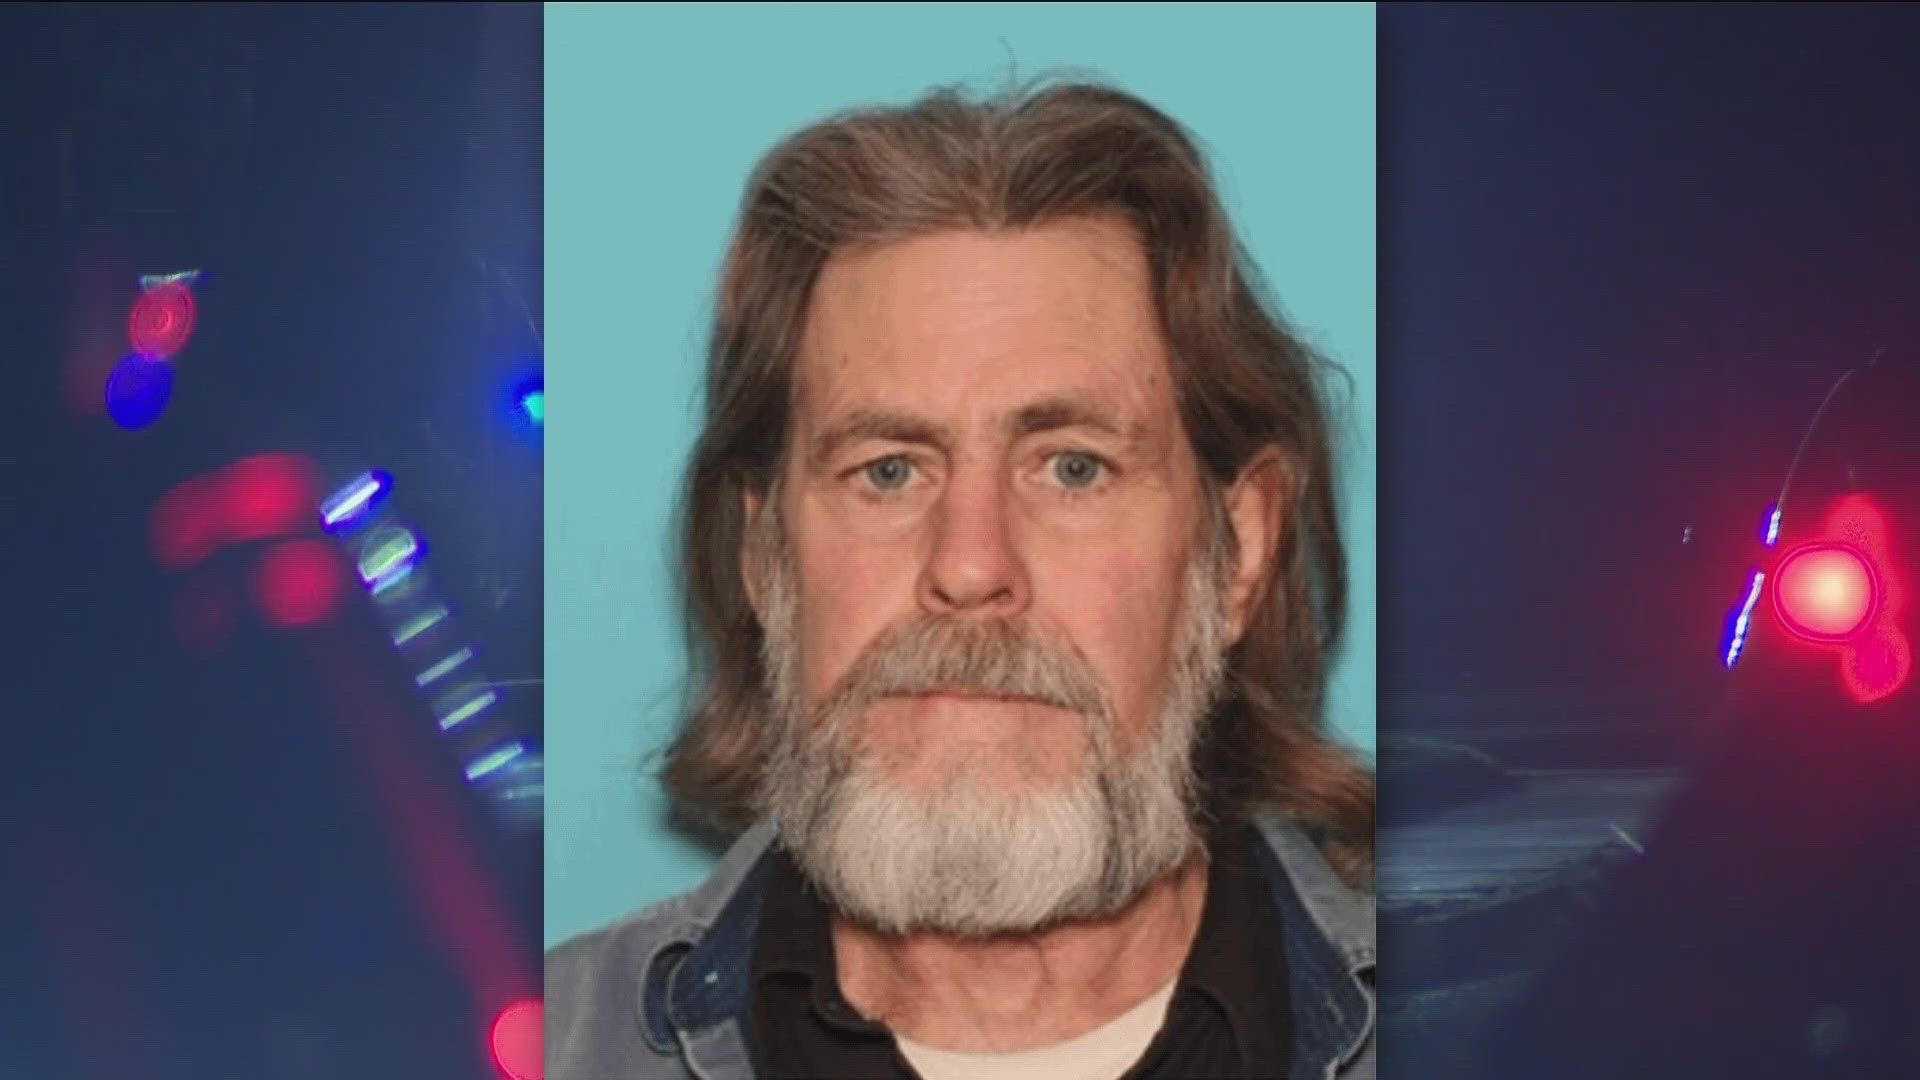 Dennis Mulqueen is suspected of shooting and killing Deputy Tobin Bolter Saturday night in Boise.